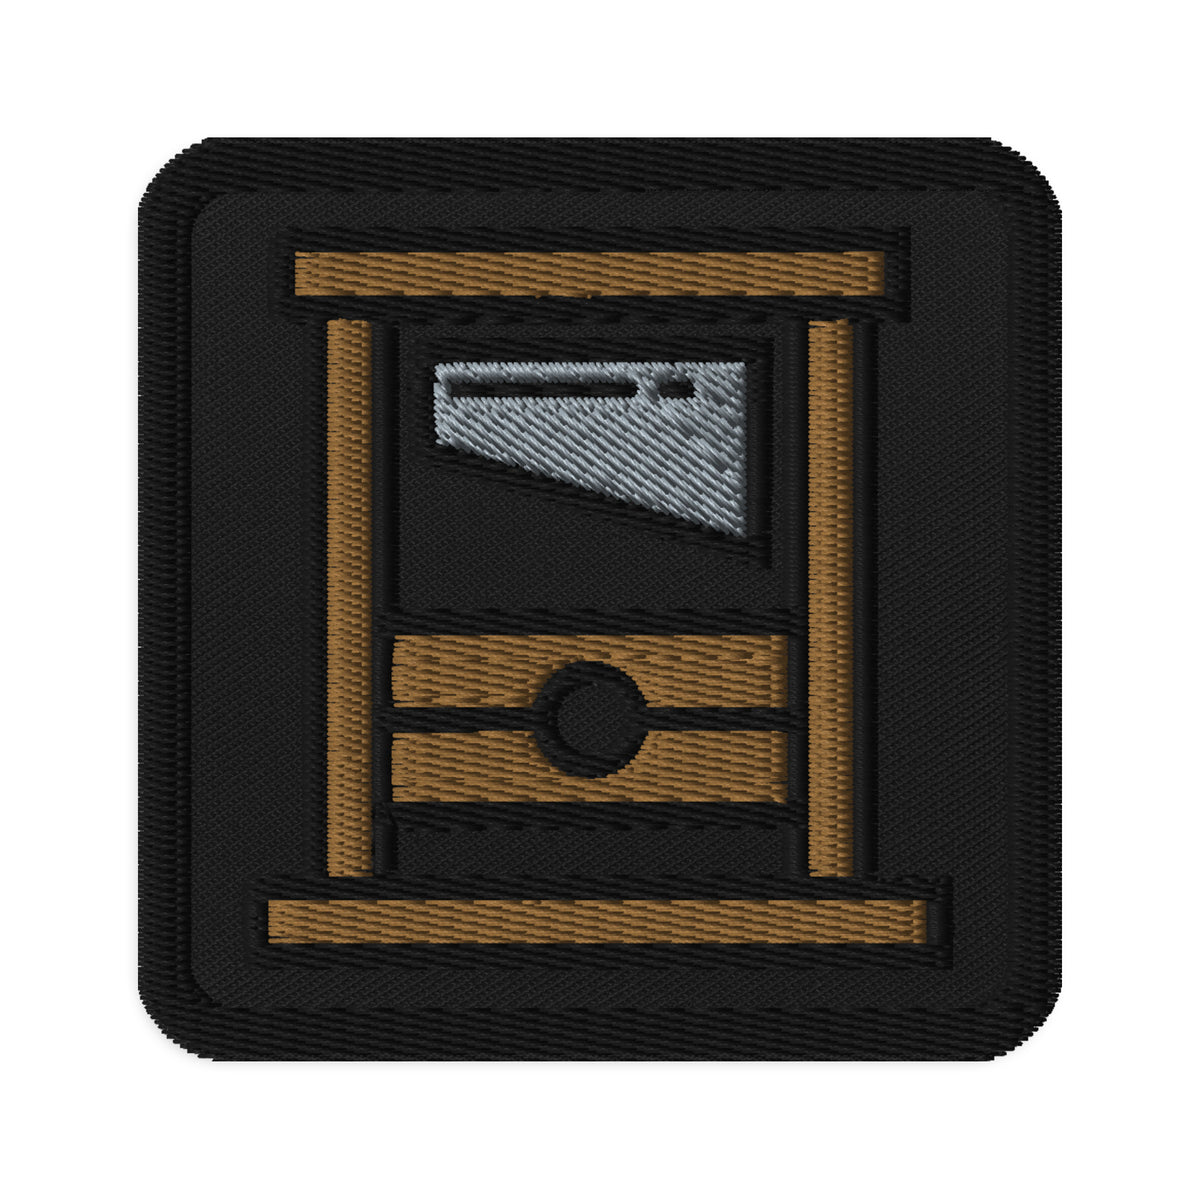 Guillotine Square Embroidered Morale Patch